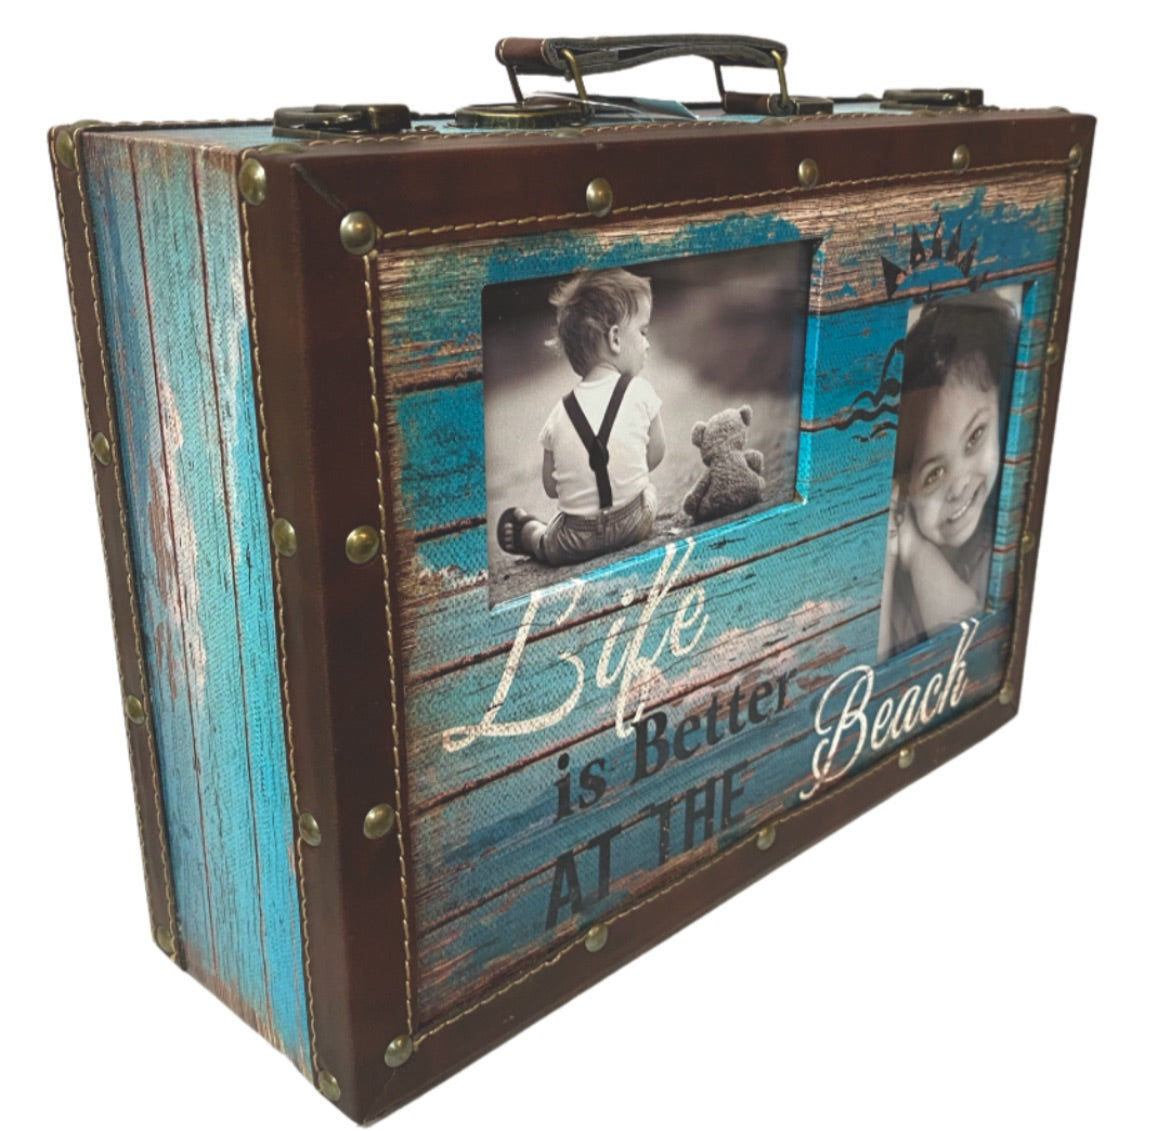 Life Is Better At The Beach Suitcase Storage Box With Picture Frames - Available in 2 Sizes